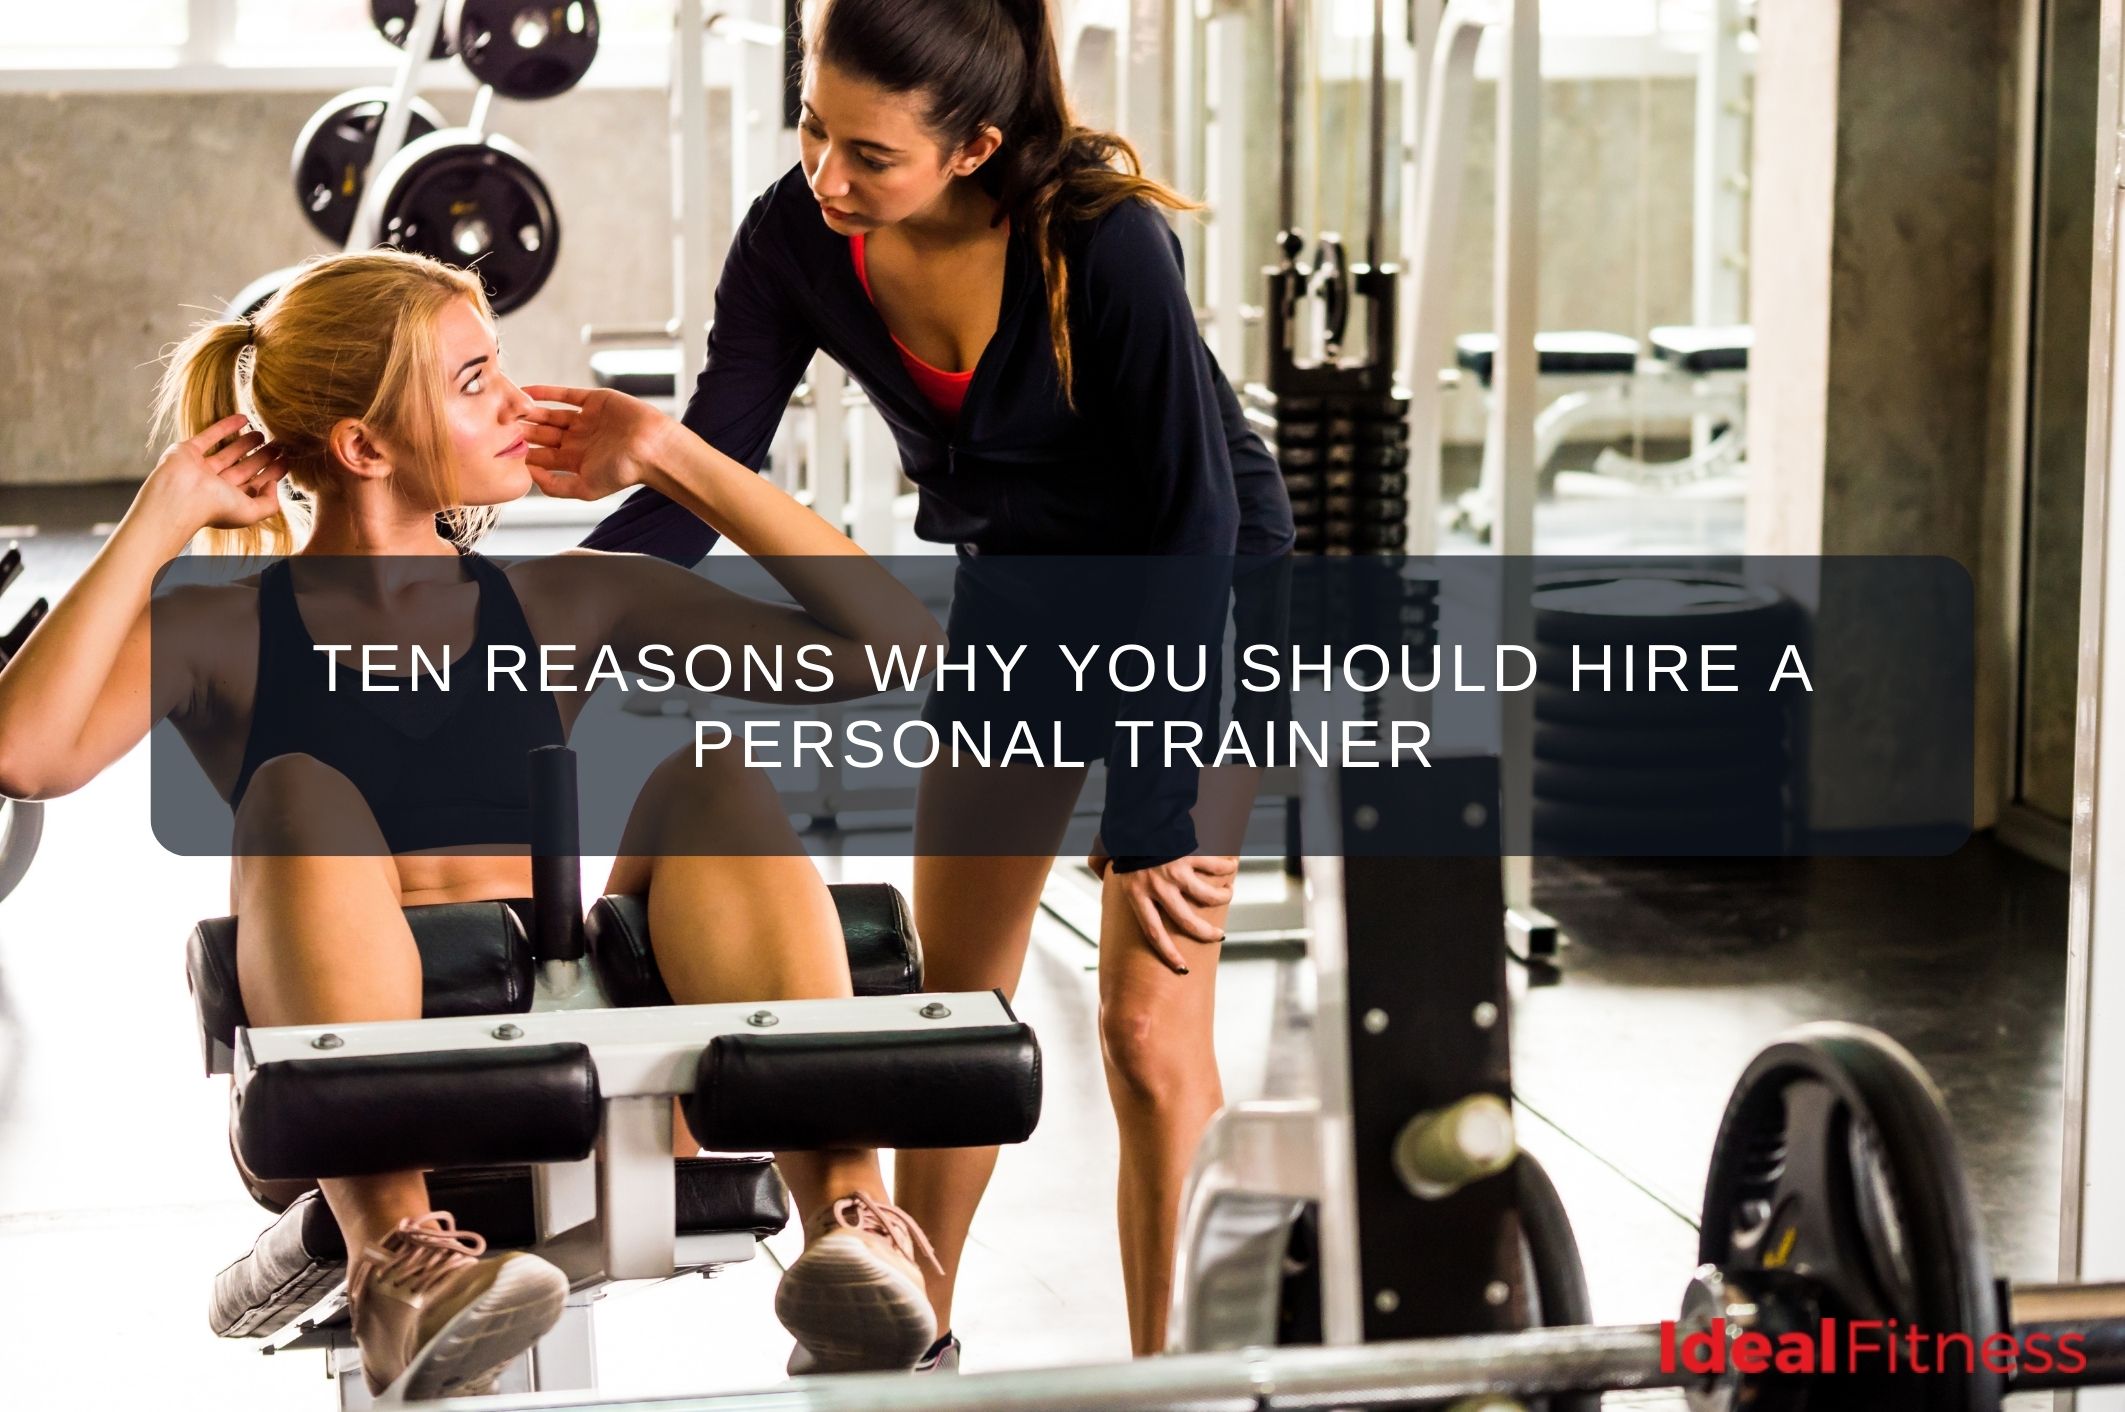 Ten Reasons Why You Should Hire a Personal Trainer